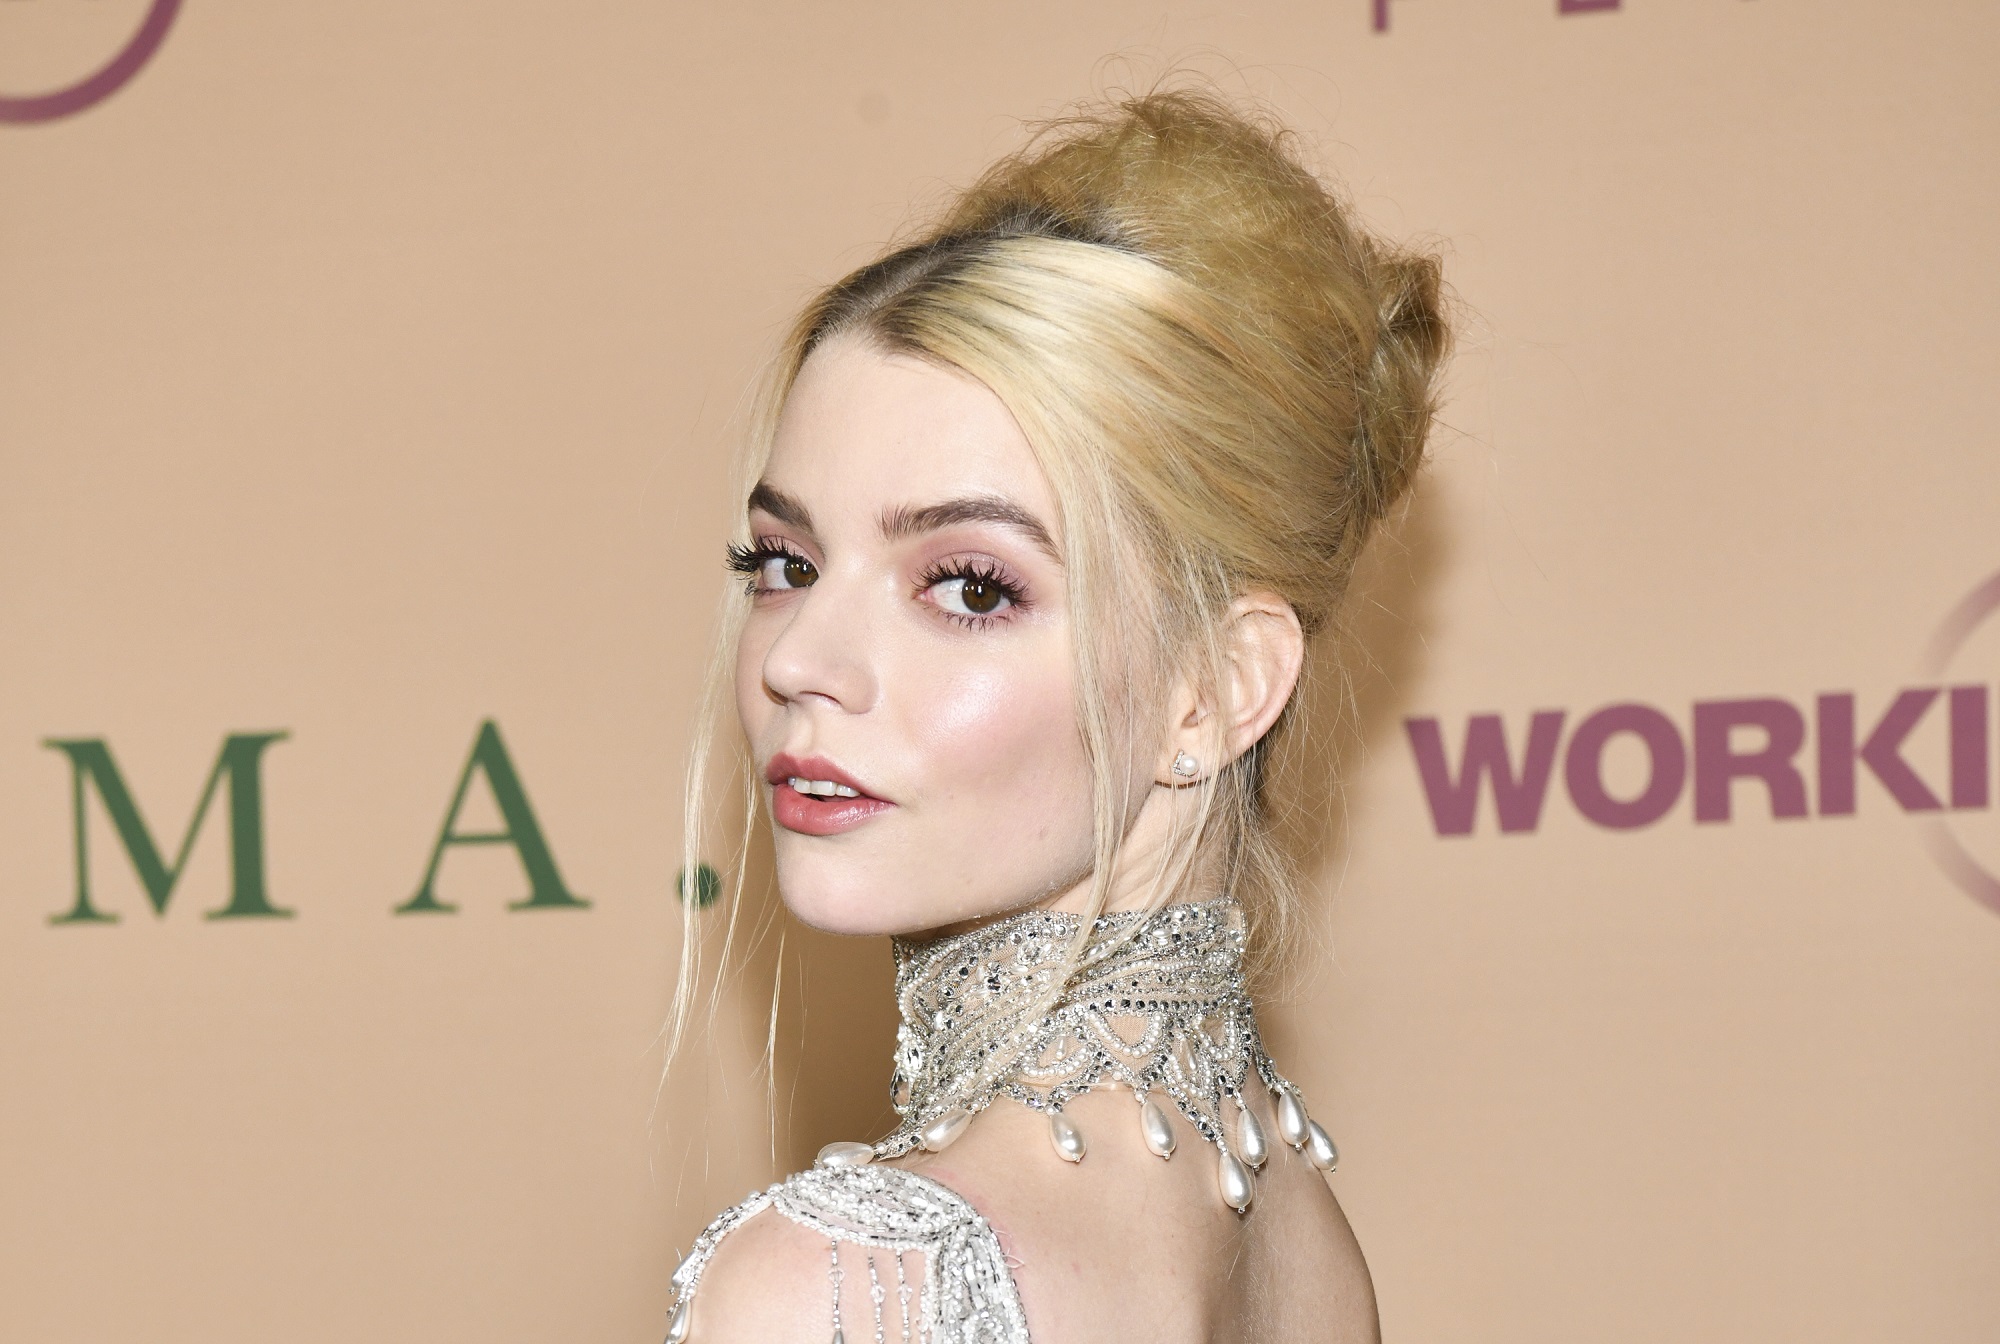 Anya Taylor-Joy attends the premiere of Focus Features' "Emma." at DGA Theater on February 18, 2020 in Los Angeles, California.